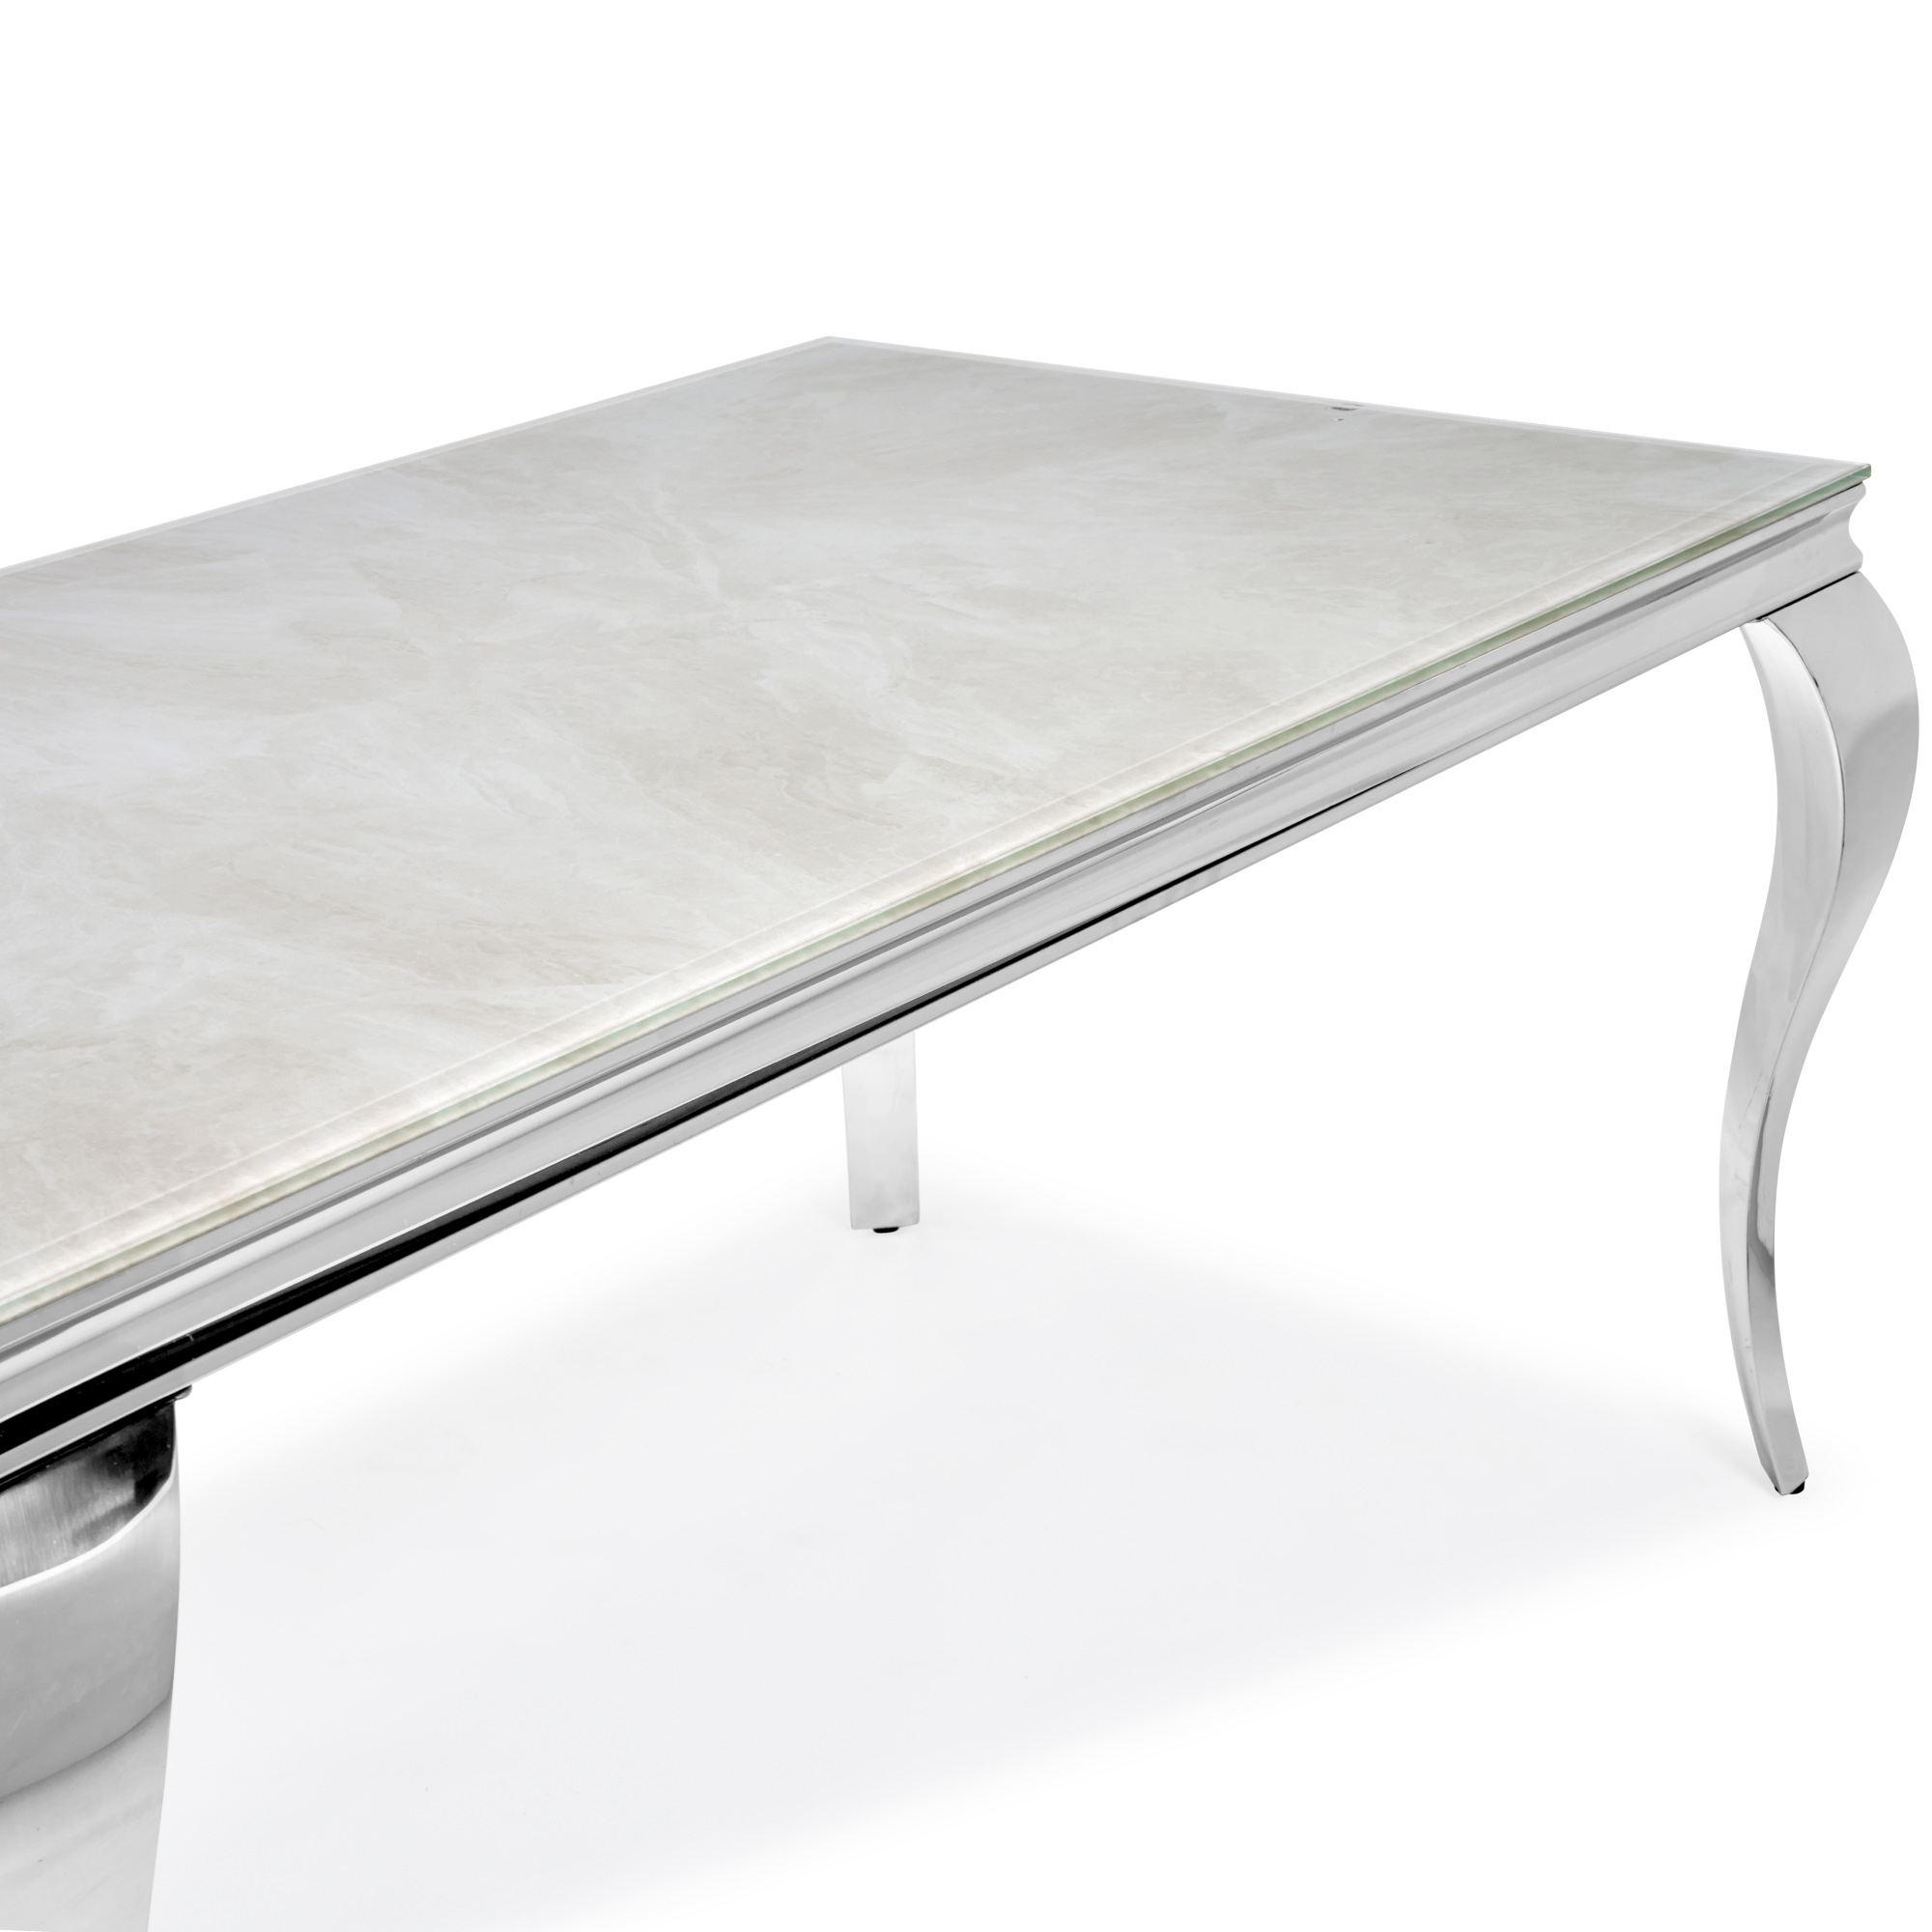 1.6m Louis Polished Stainless Steel Dining Table with Cream Marble Effect Tempered Glass